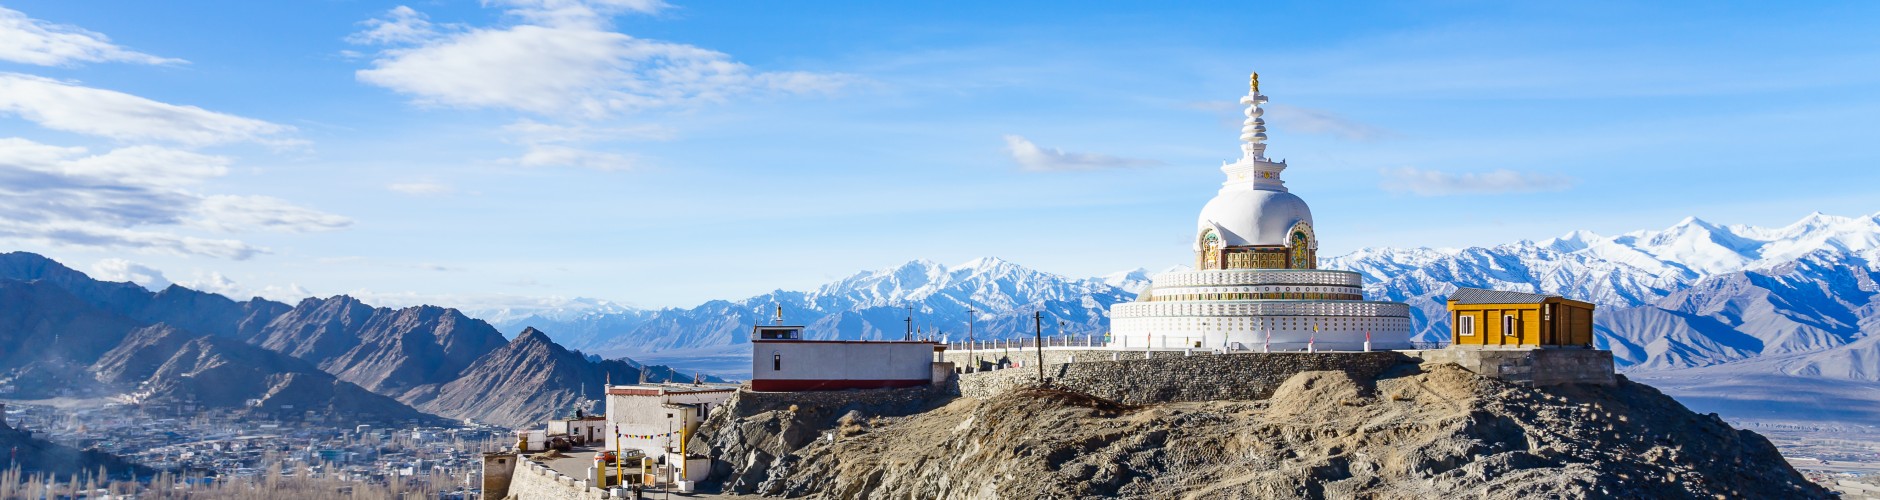 A white colour building on the top of a mountain with other mountains surrounded